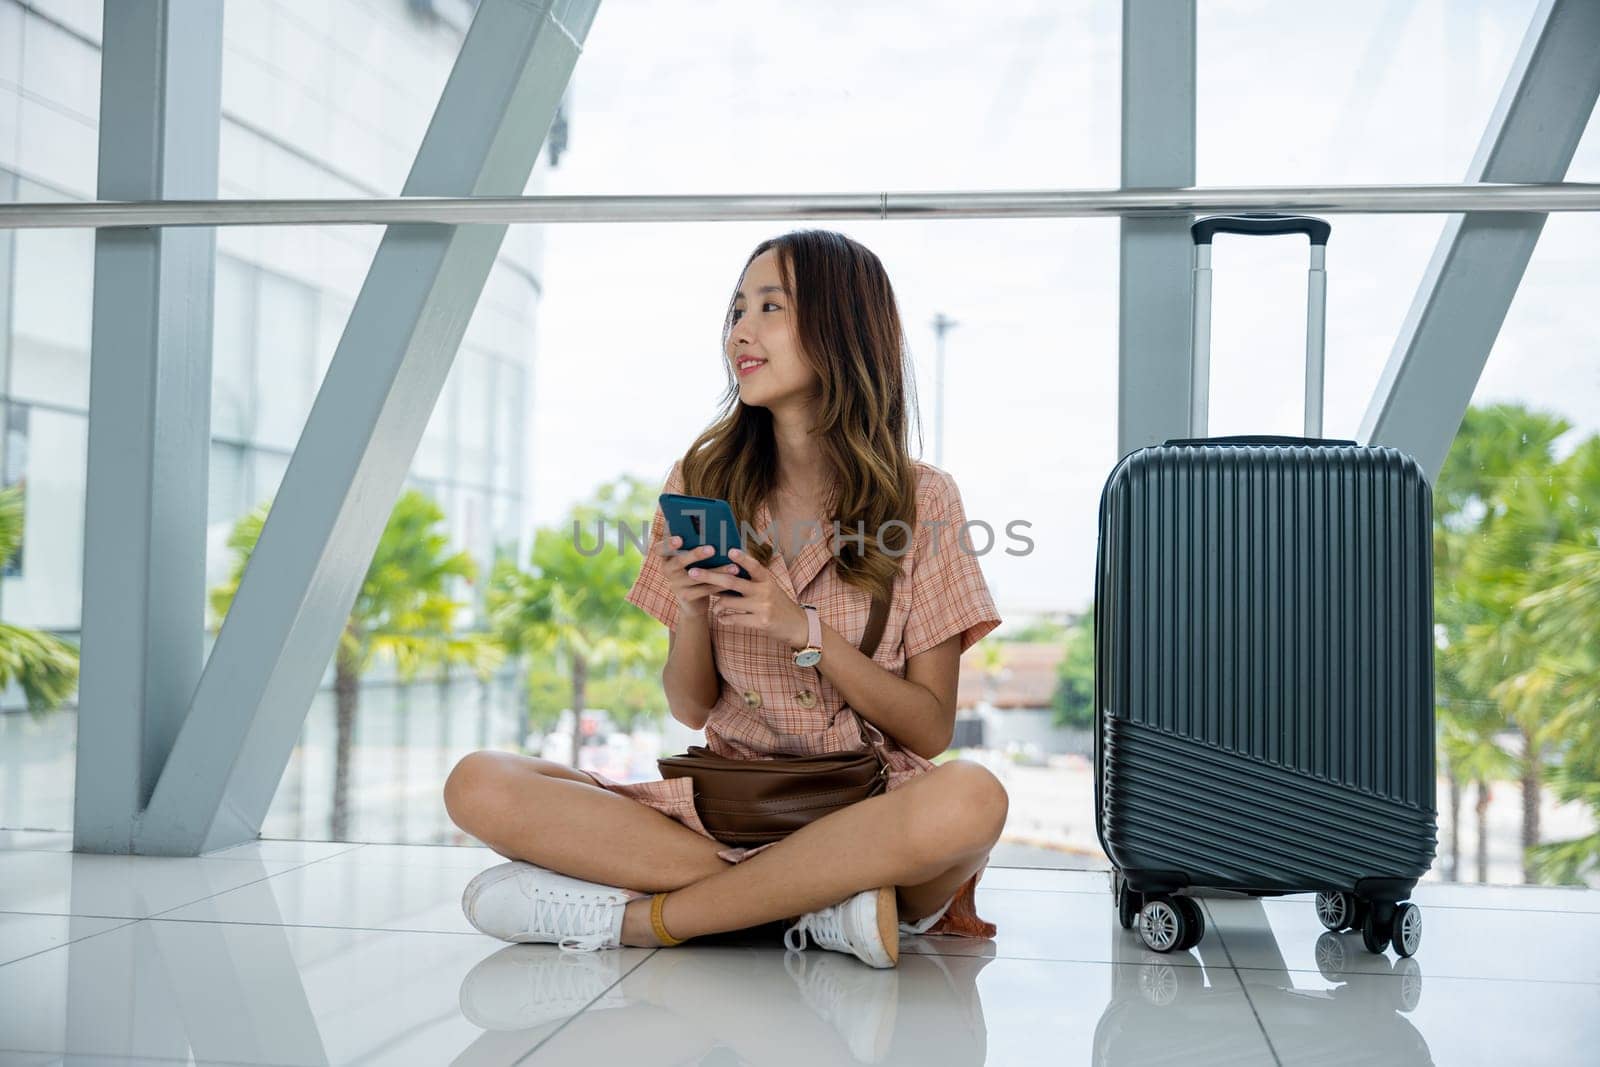 Asian woman sitting on the floor with her luggage and using her phone to stay connected while traveling. Tourist journey trip concept